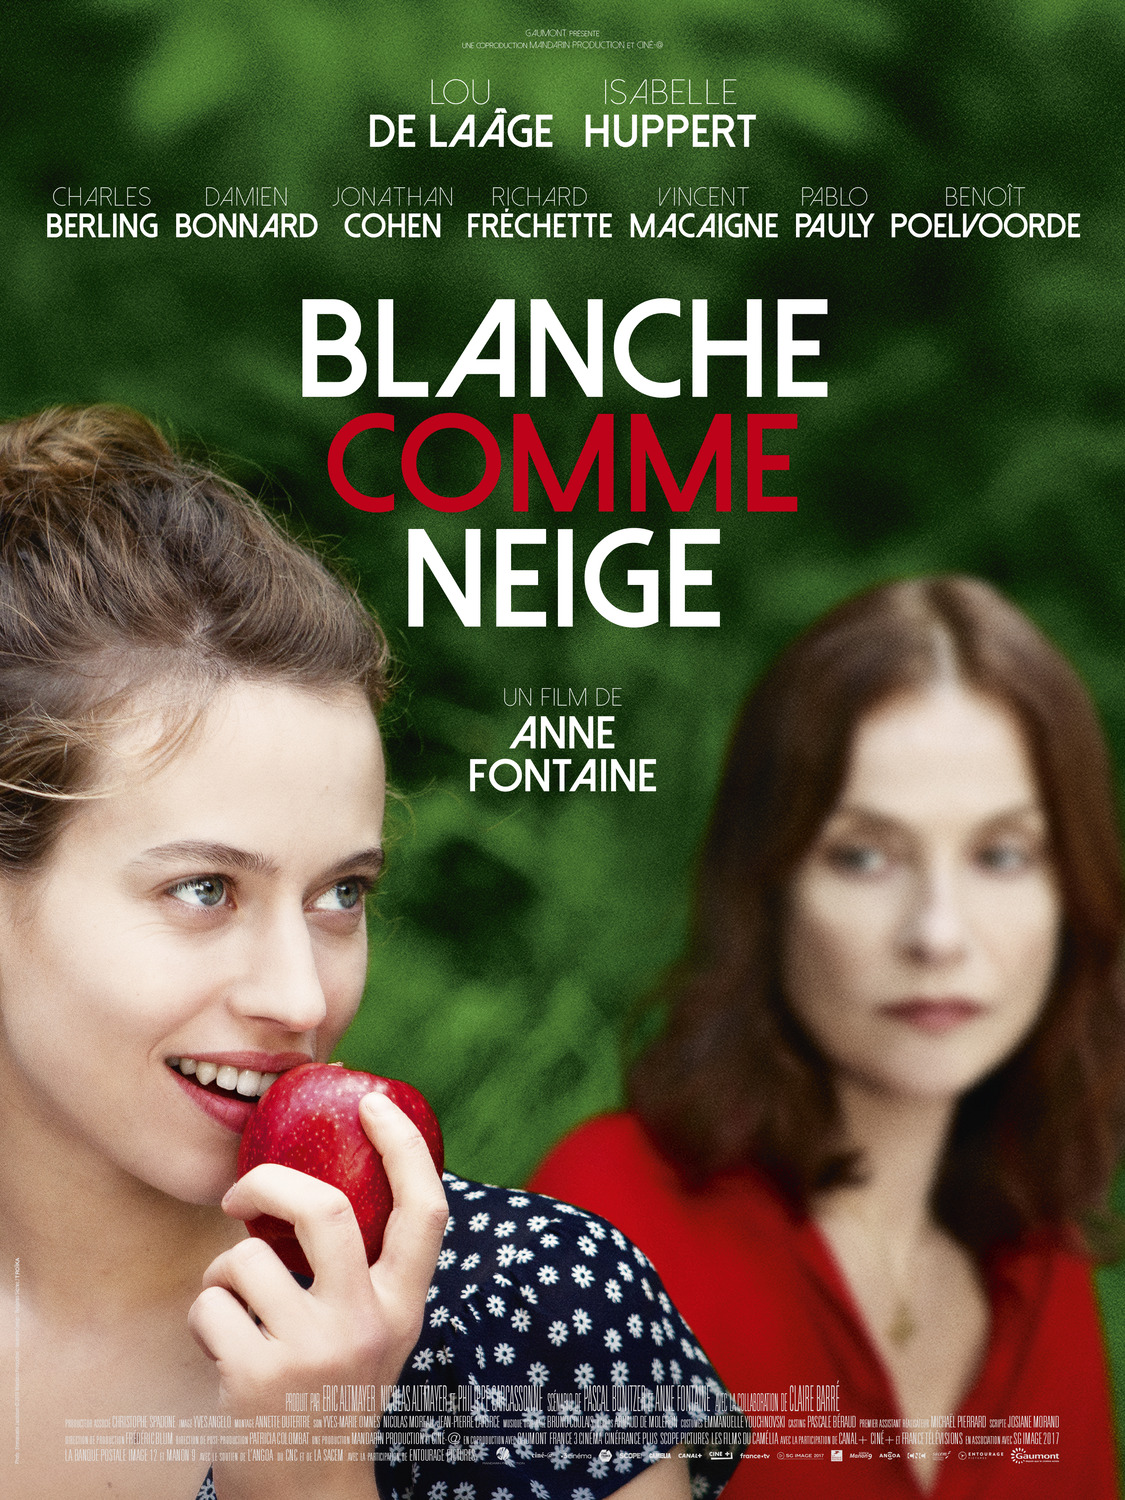 Extra Large Movie Poster Image for Blanche comme neige 